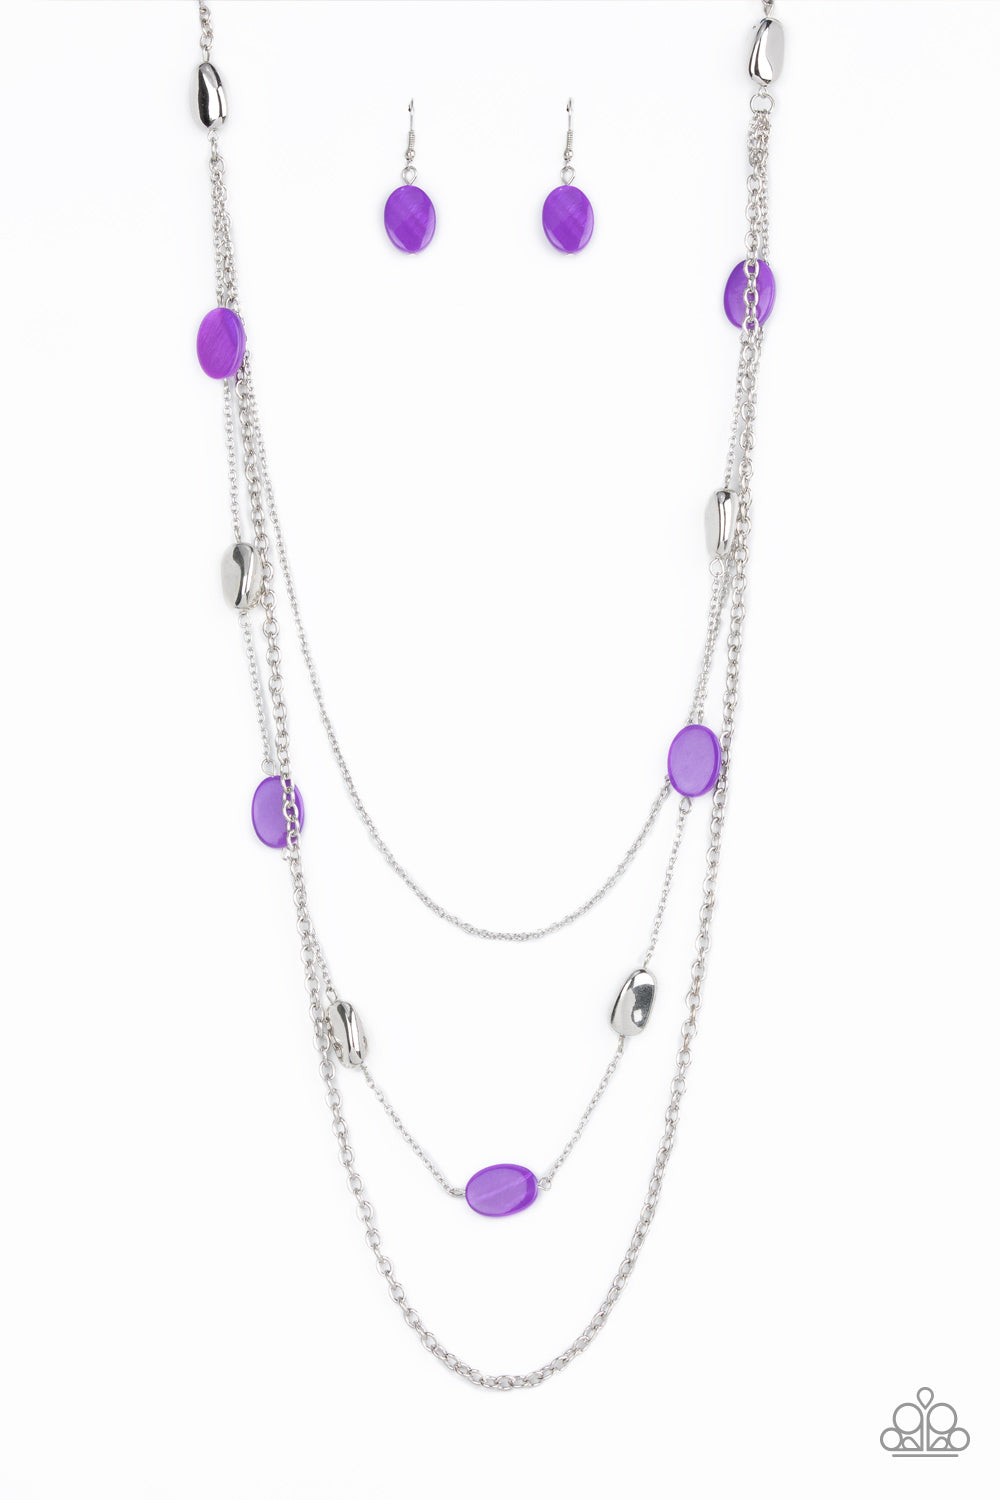 Barefoot and Beachbound - Purple Pebble Bead Necklace